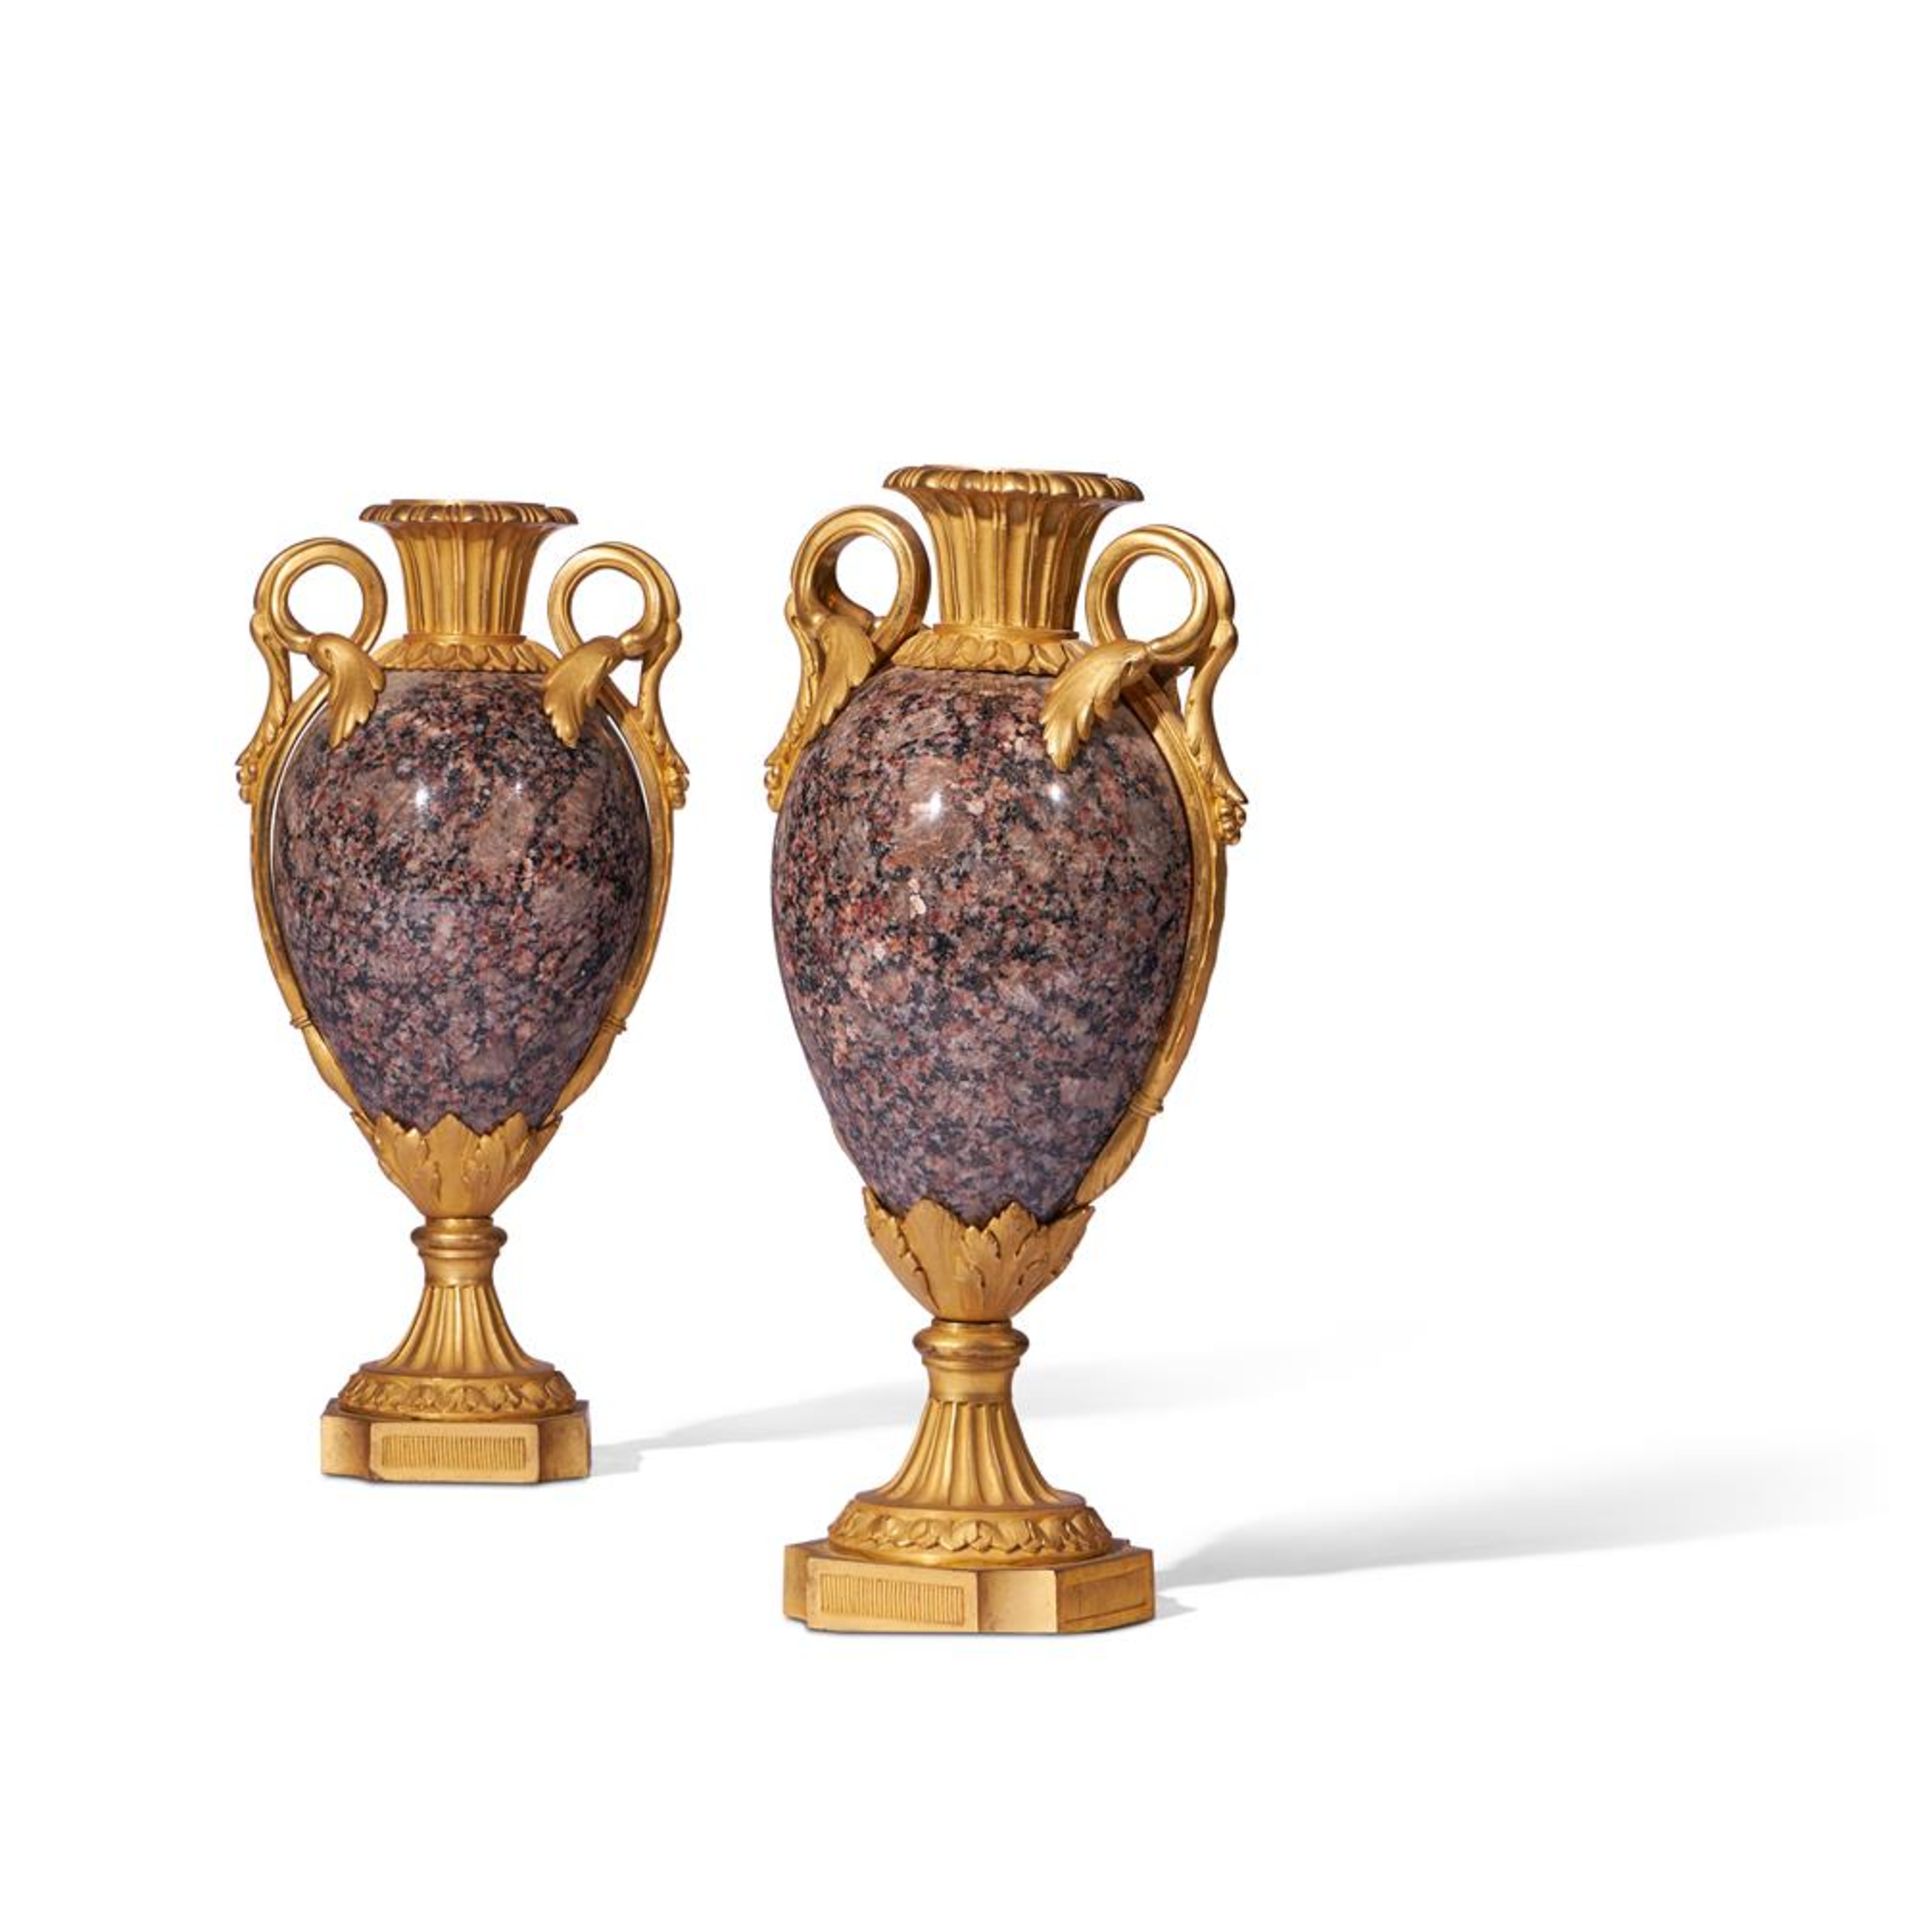 A PAIR OF GILT ORMOLU MOUNTED GRANITE VASES IN THE LOUIS XVI STYLE, FRENCH - Image 2 of 4